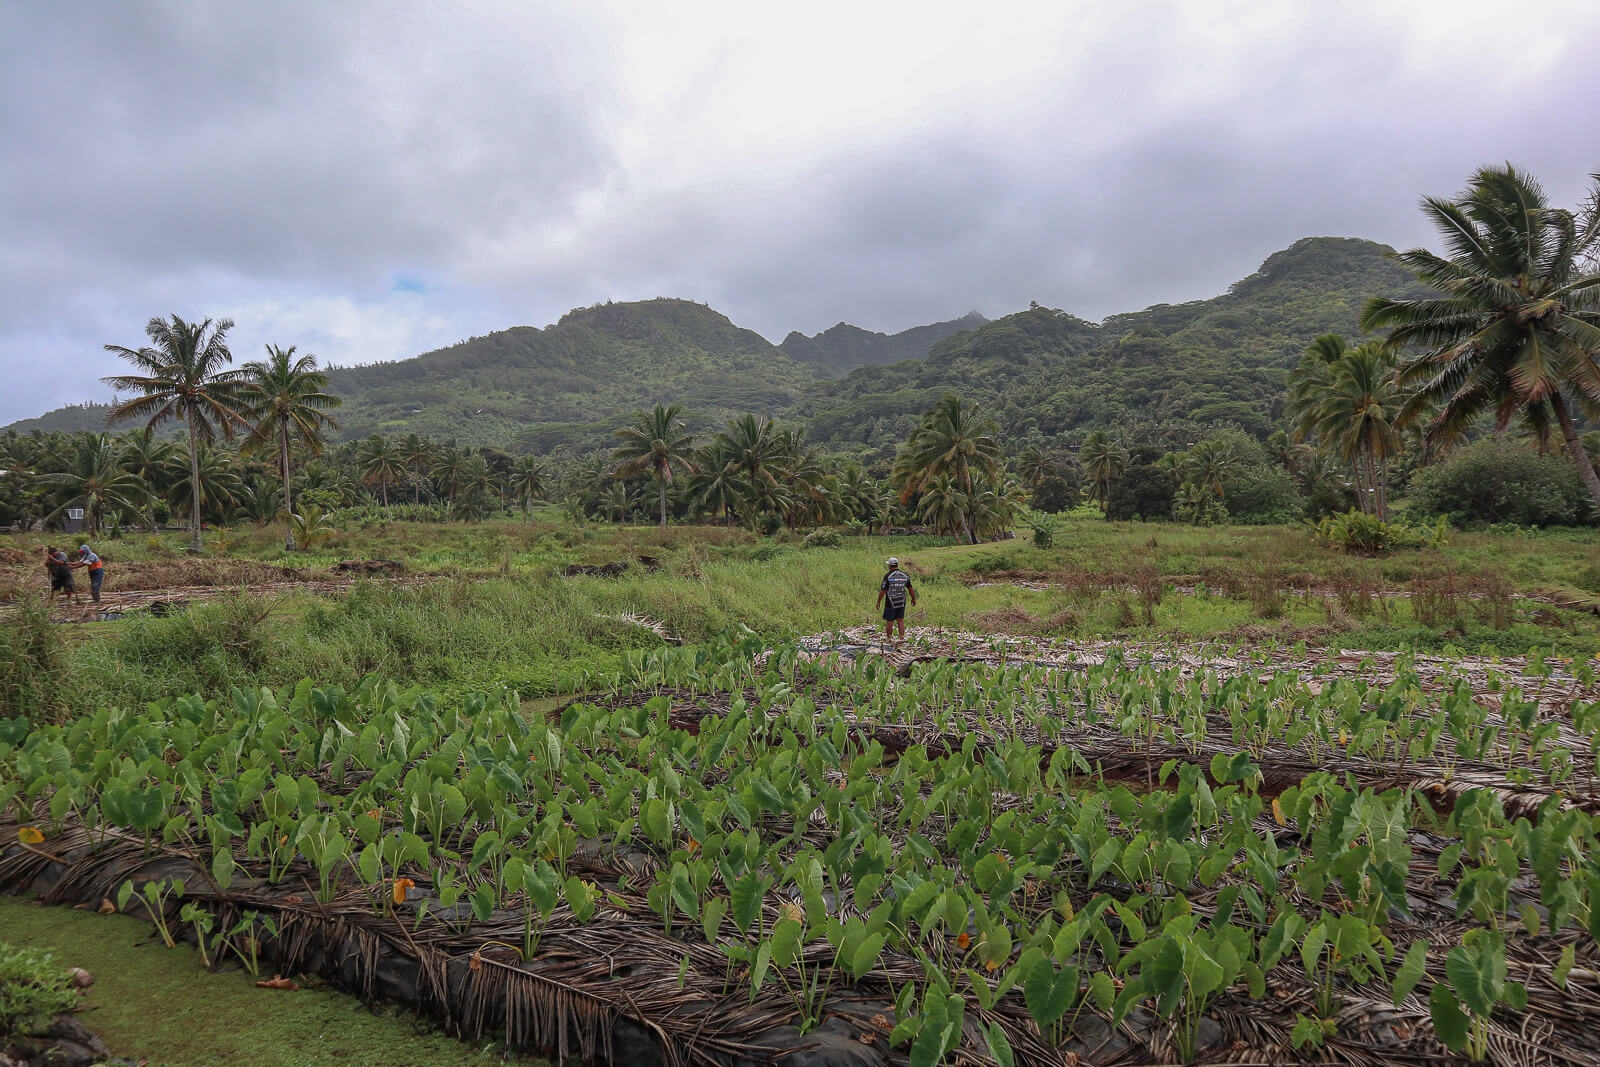 Fields of plants and crops with hills and palms in the background